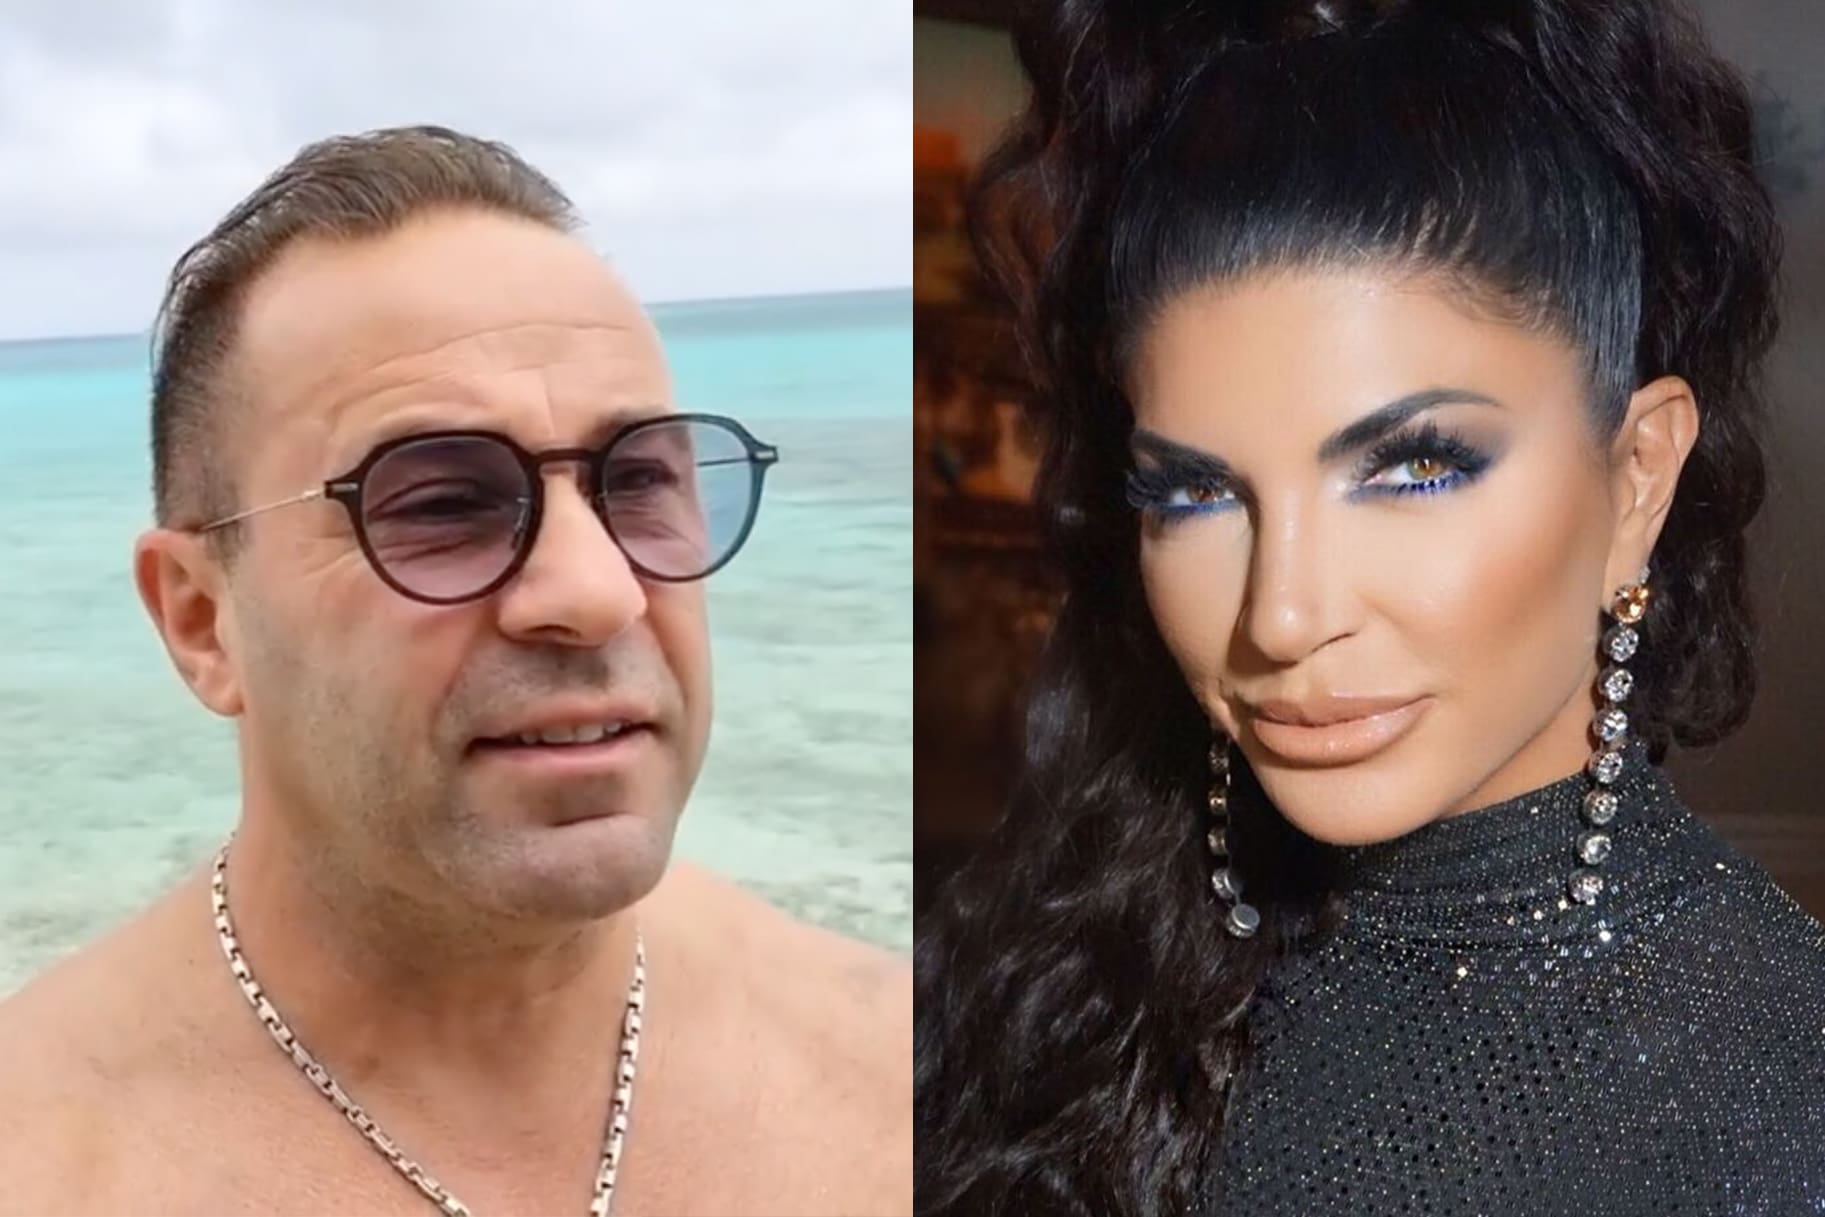 ”joe-giudice-has-fun-on-luxury-yacht-in-the-bahamas-after-deportation-can-he-return-to-the-states-yet”